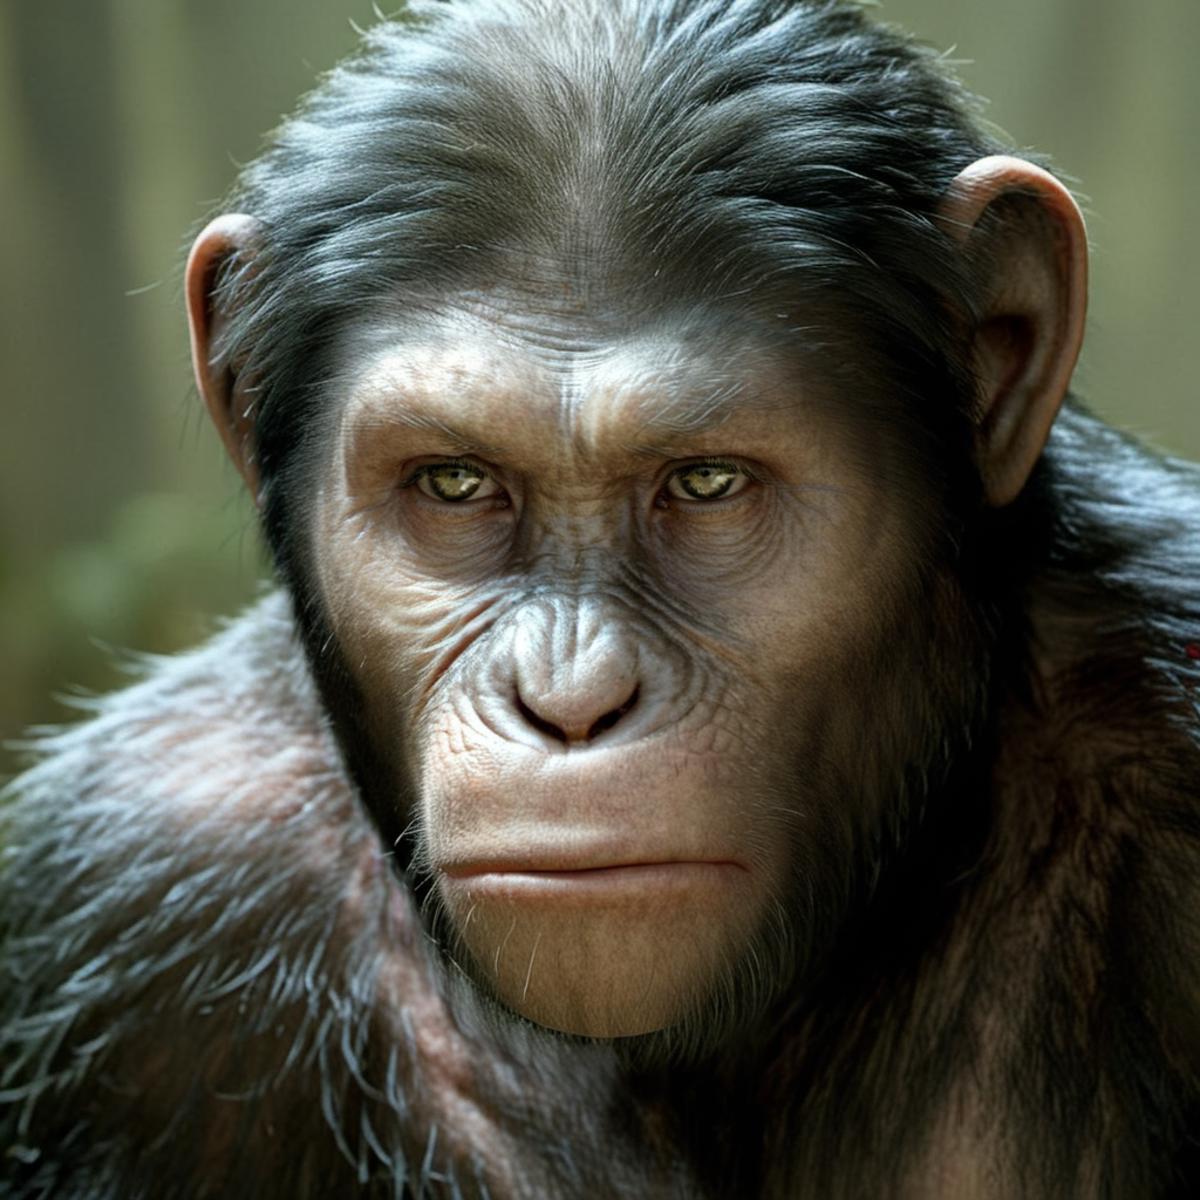 Caesar - Planet of the Apes franchise 2010s - SDXL image by PhotobAIt